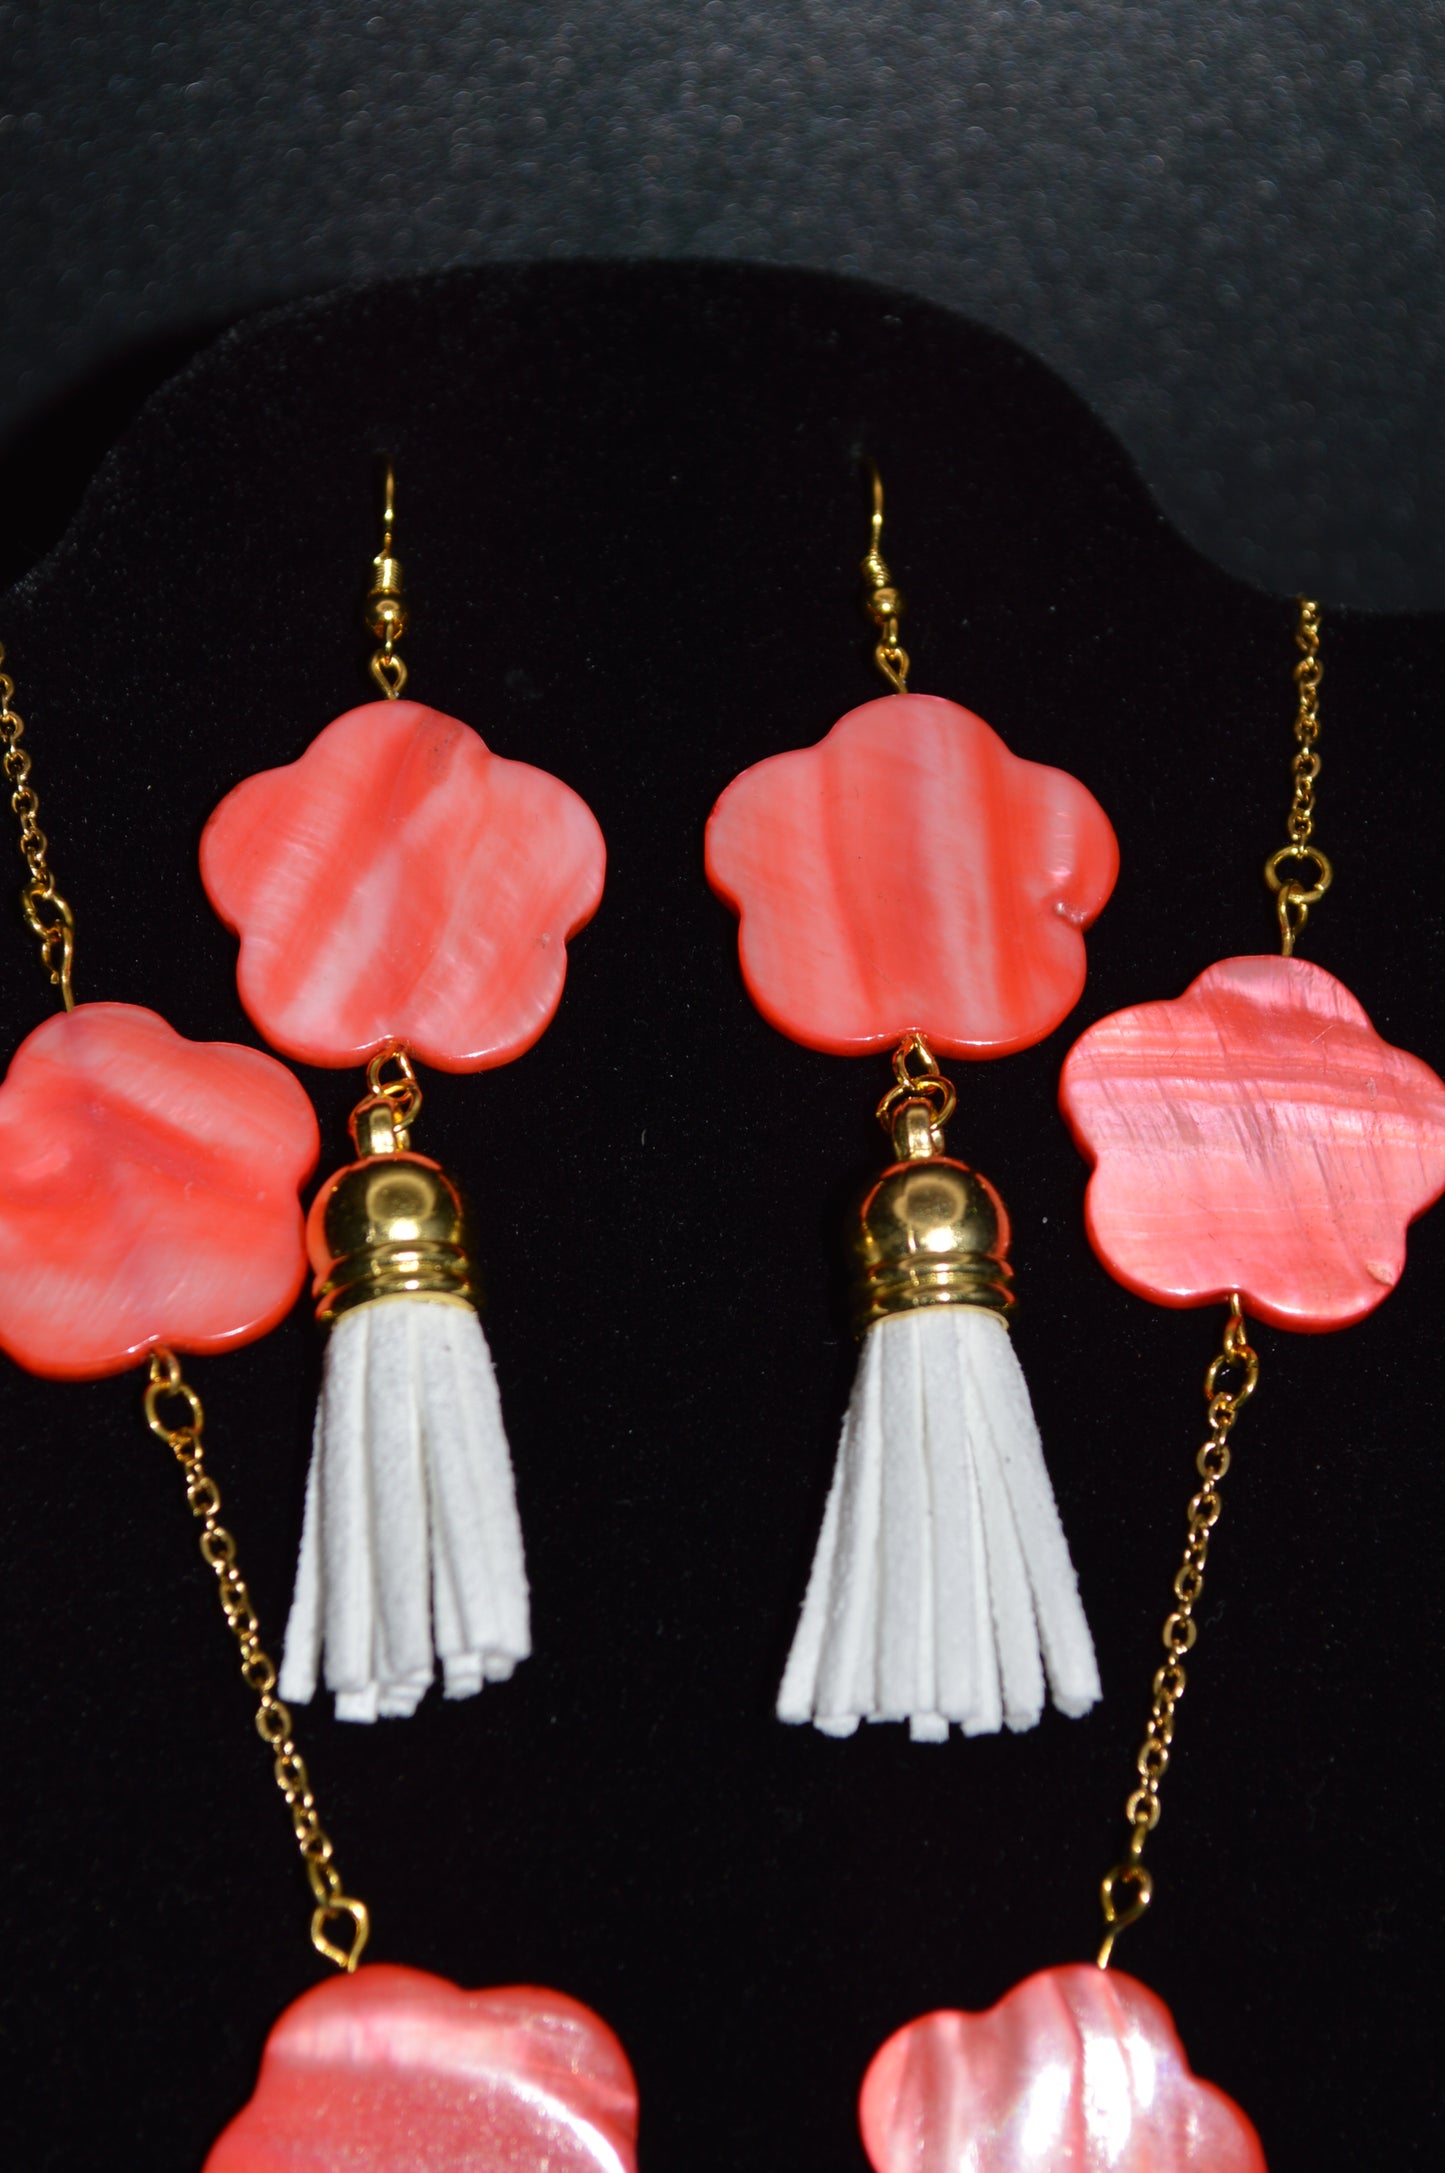 Peach Mother of Pearl Flowers on a Gold Chain with a White Tassel Necklace and Earring Set